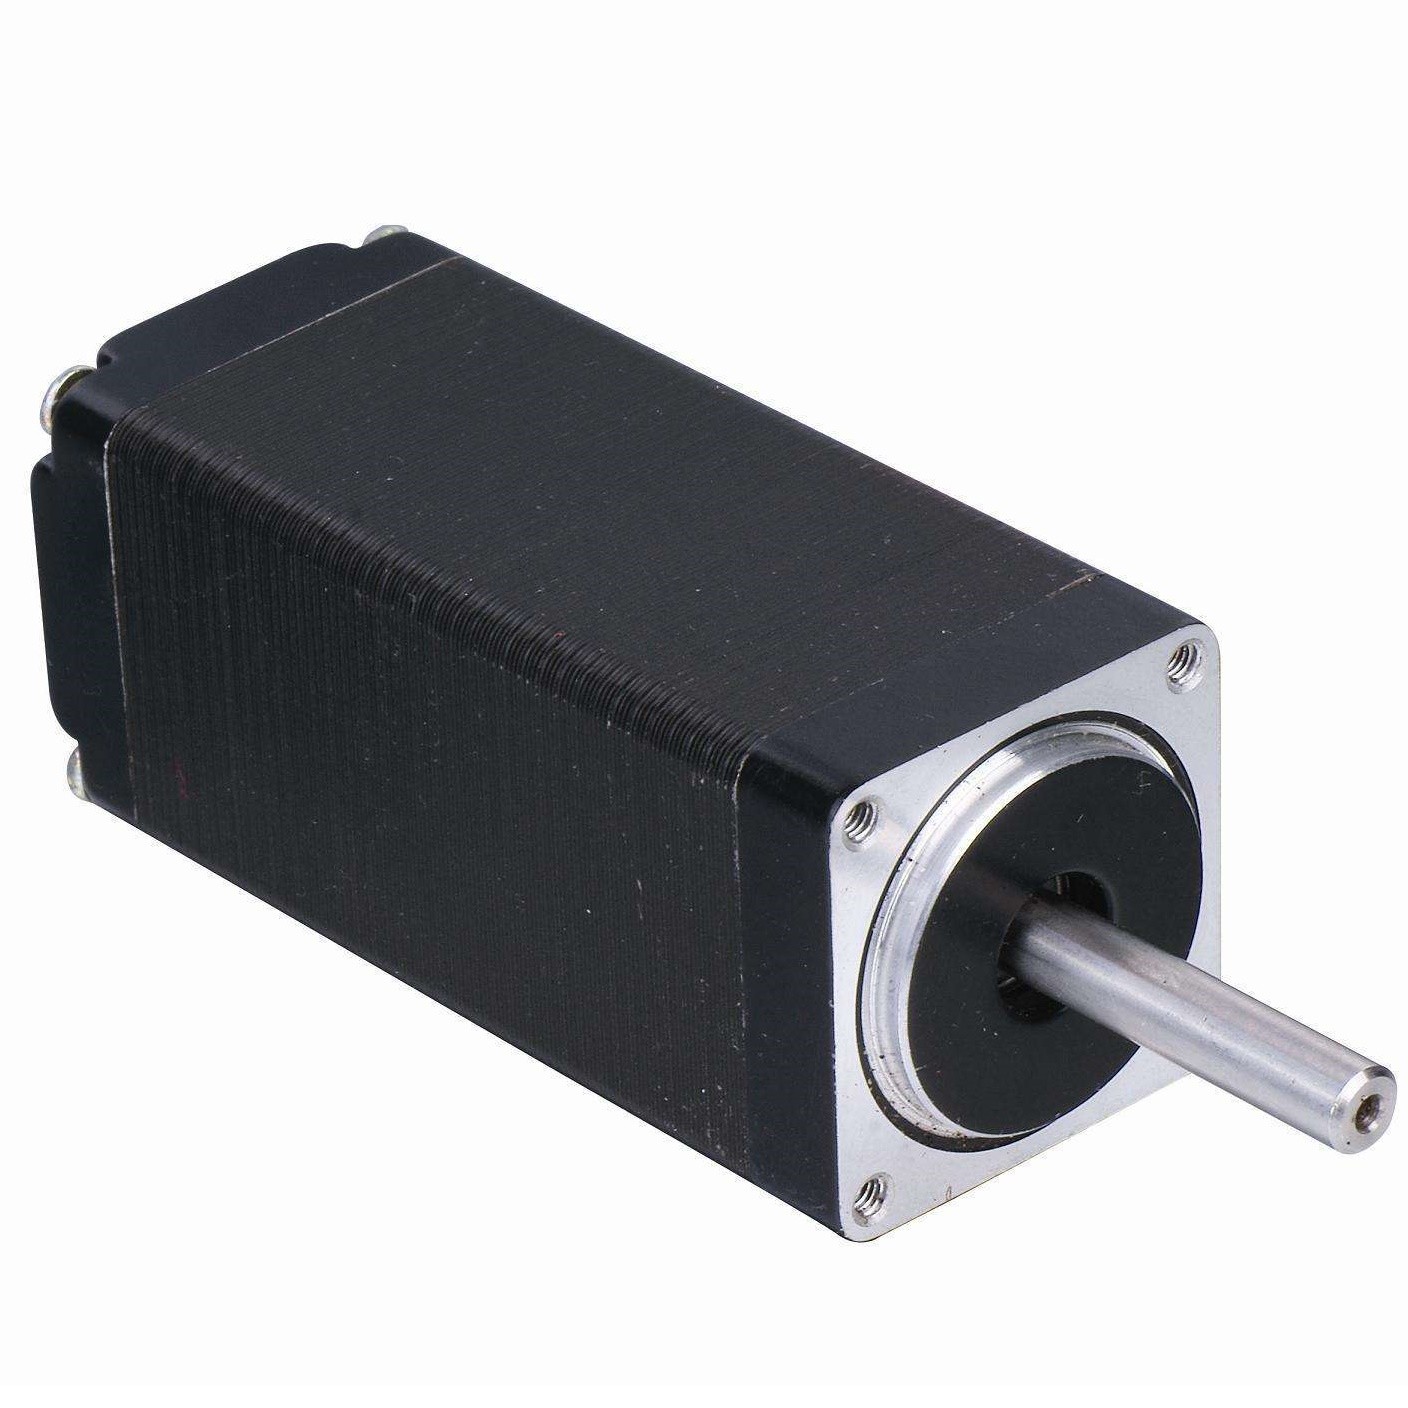 Buy cheap NEMA8 Stepping Motor, 1.8° step angle stepper motor from wholesalers